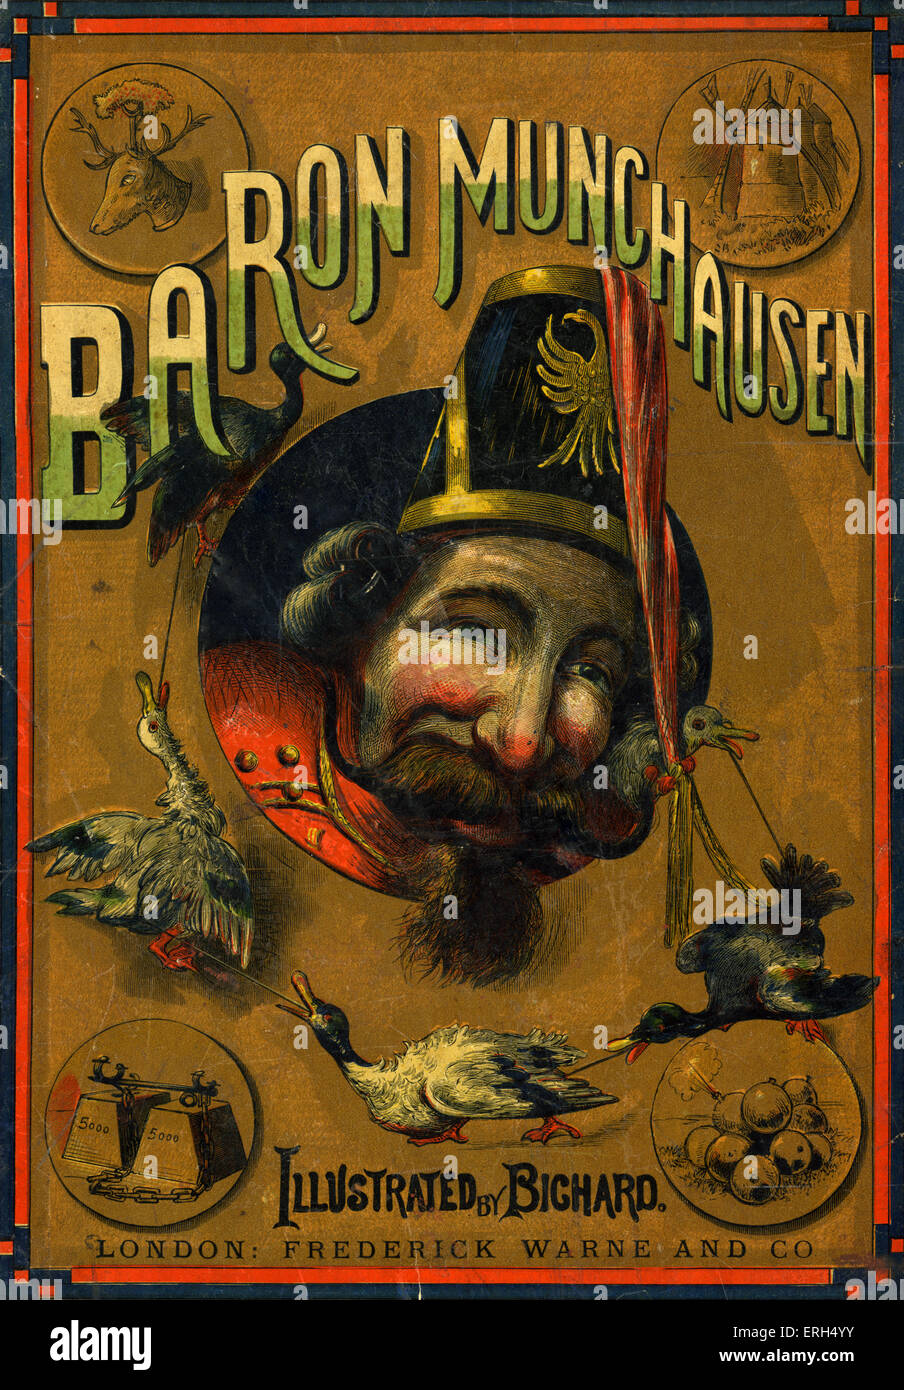 'The Adventures of Baron Munchausen' illlustrated by Alphonse Adolphe Bichard (b. 1841). Based on the life of Karl Friedrich Stock Photo